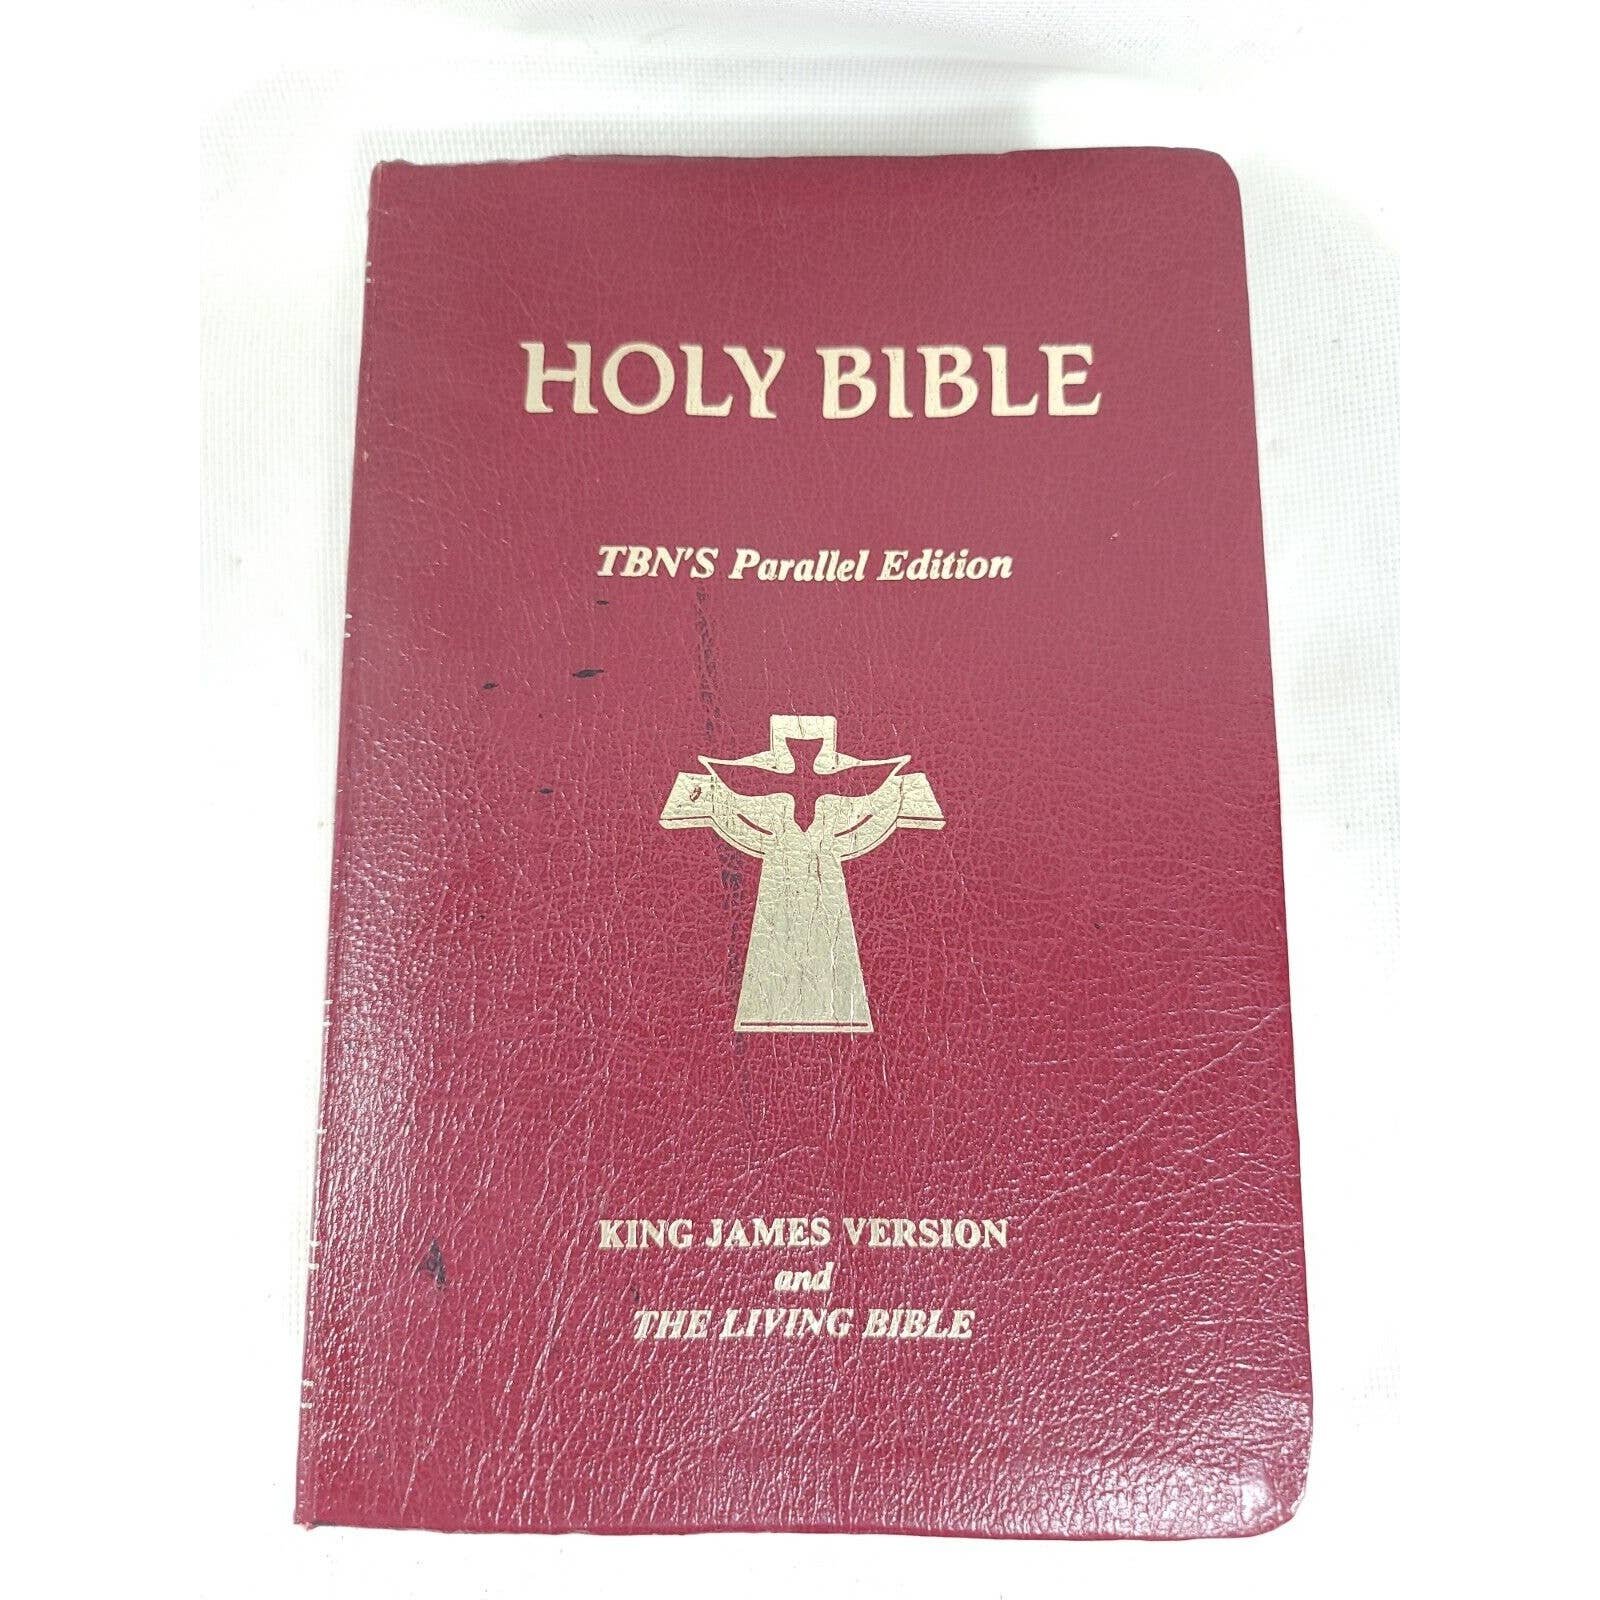 Holy Bible Tbn Parallel Edition King James Version KJV and The Living Bible QYyBZQ9G4